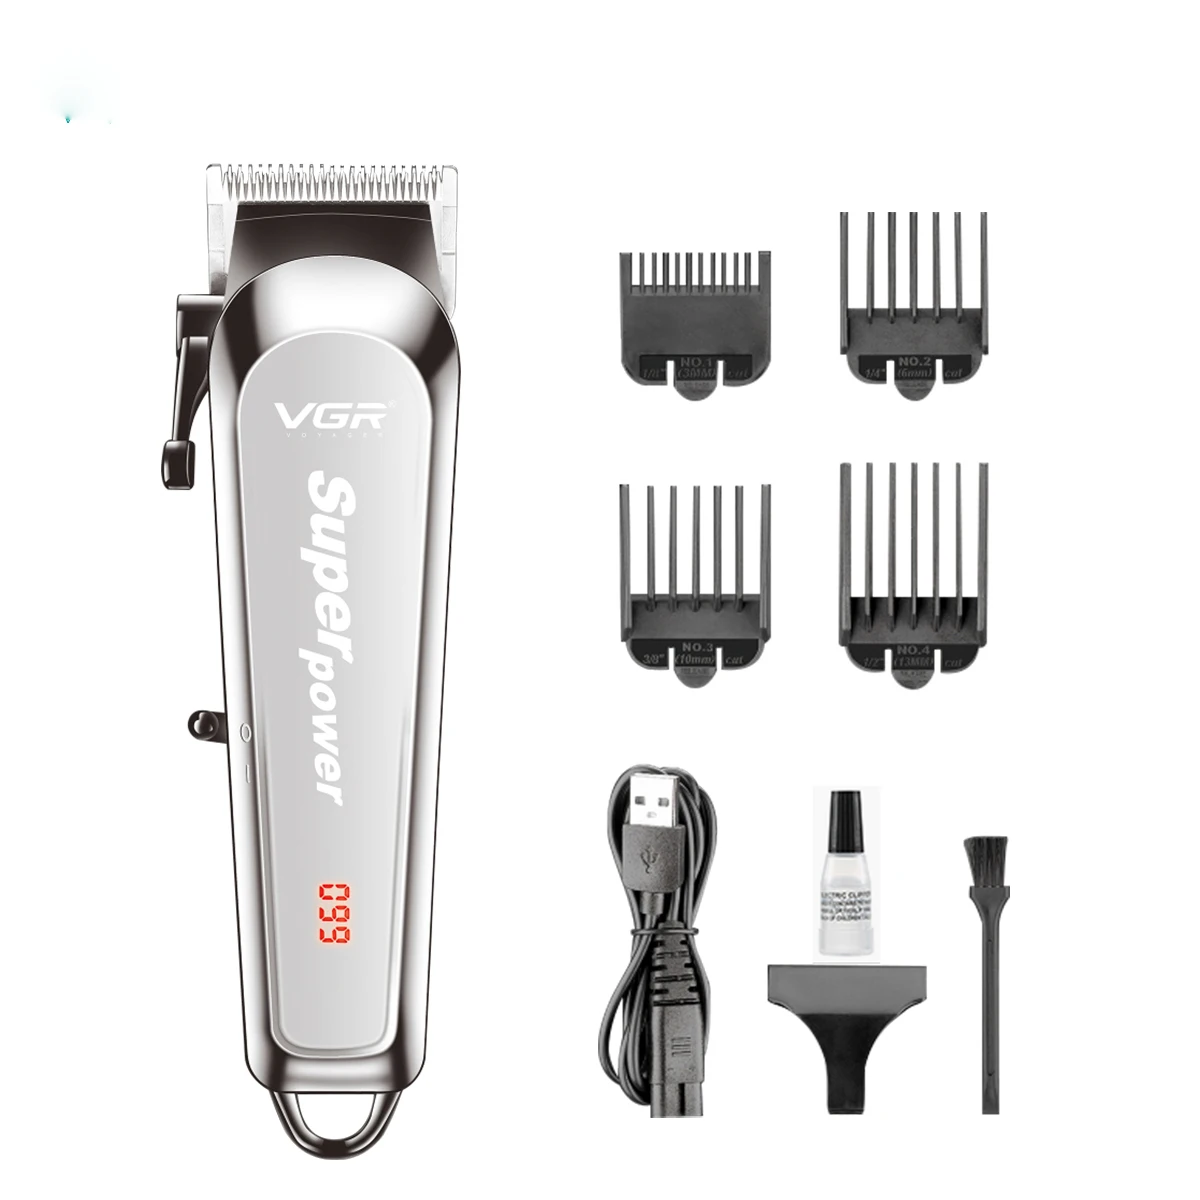 

VGR V-060 Home Hair Clipper LCD Display Limit Comb, Professional Hairdresser Electric Hair Trimmer Men Barber Oil Head Carving